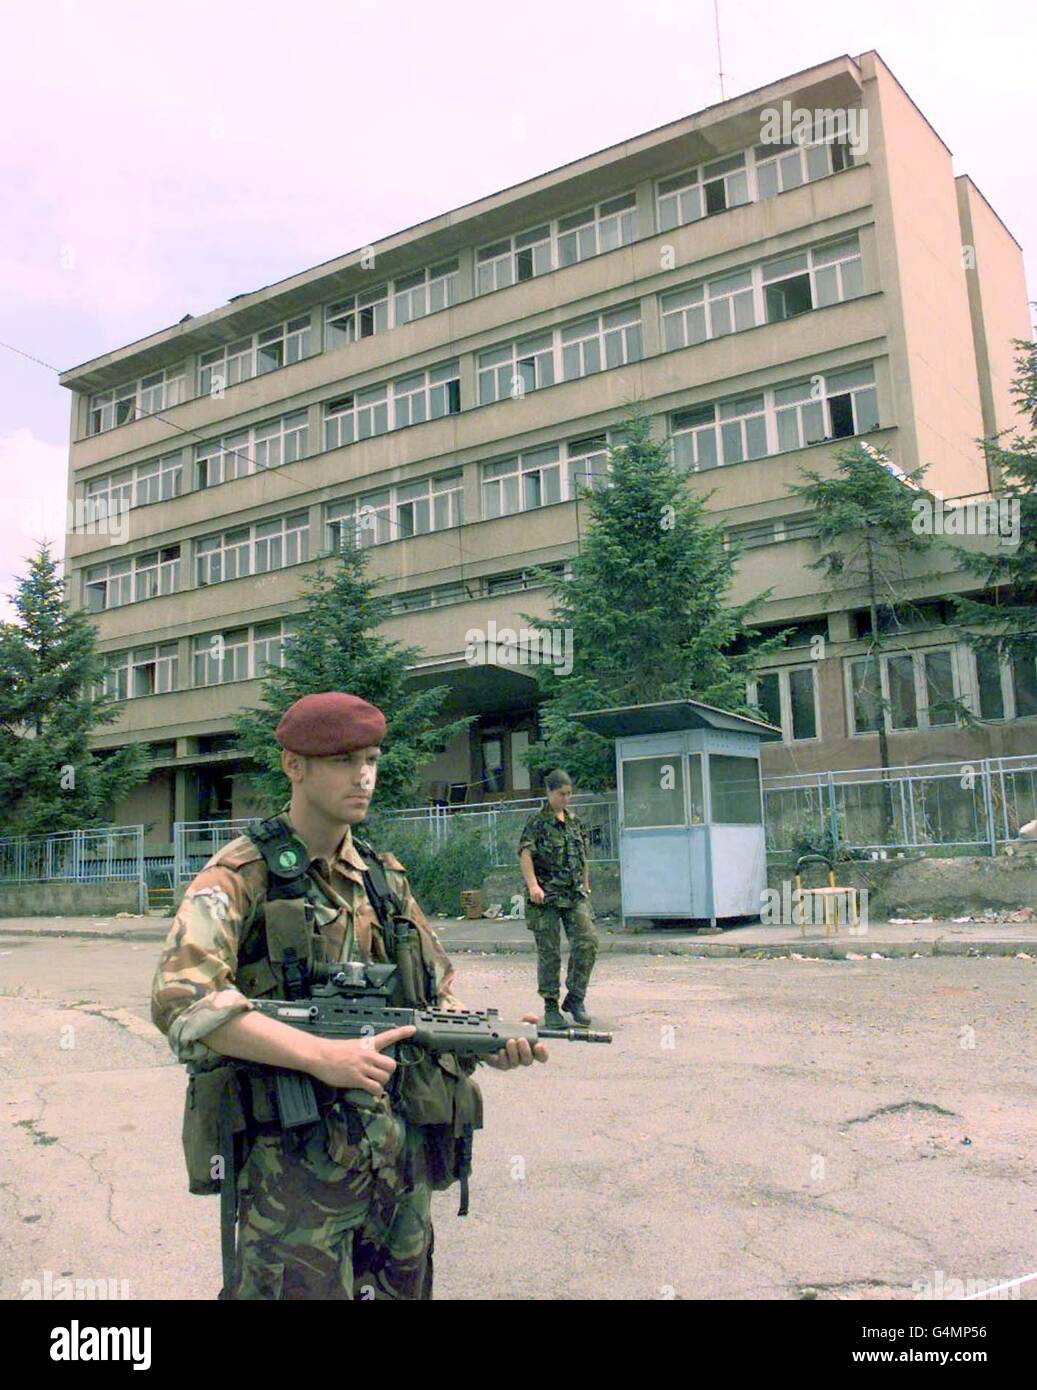 The exterior view of the school hat became a Serbian Police Head Quarters in Pristina, Kosovo, inside which a torture chamber was found by the British Army who have entered the province as part of a NATO peace-keeping force. Stock Photo